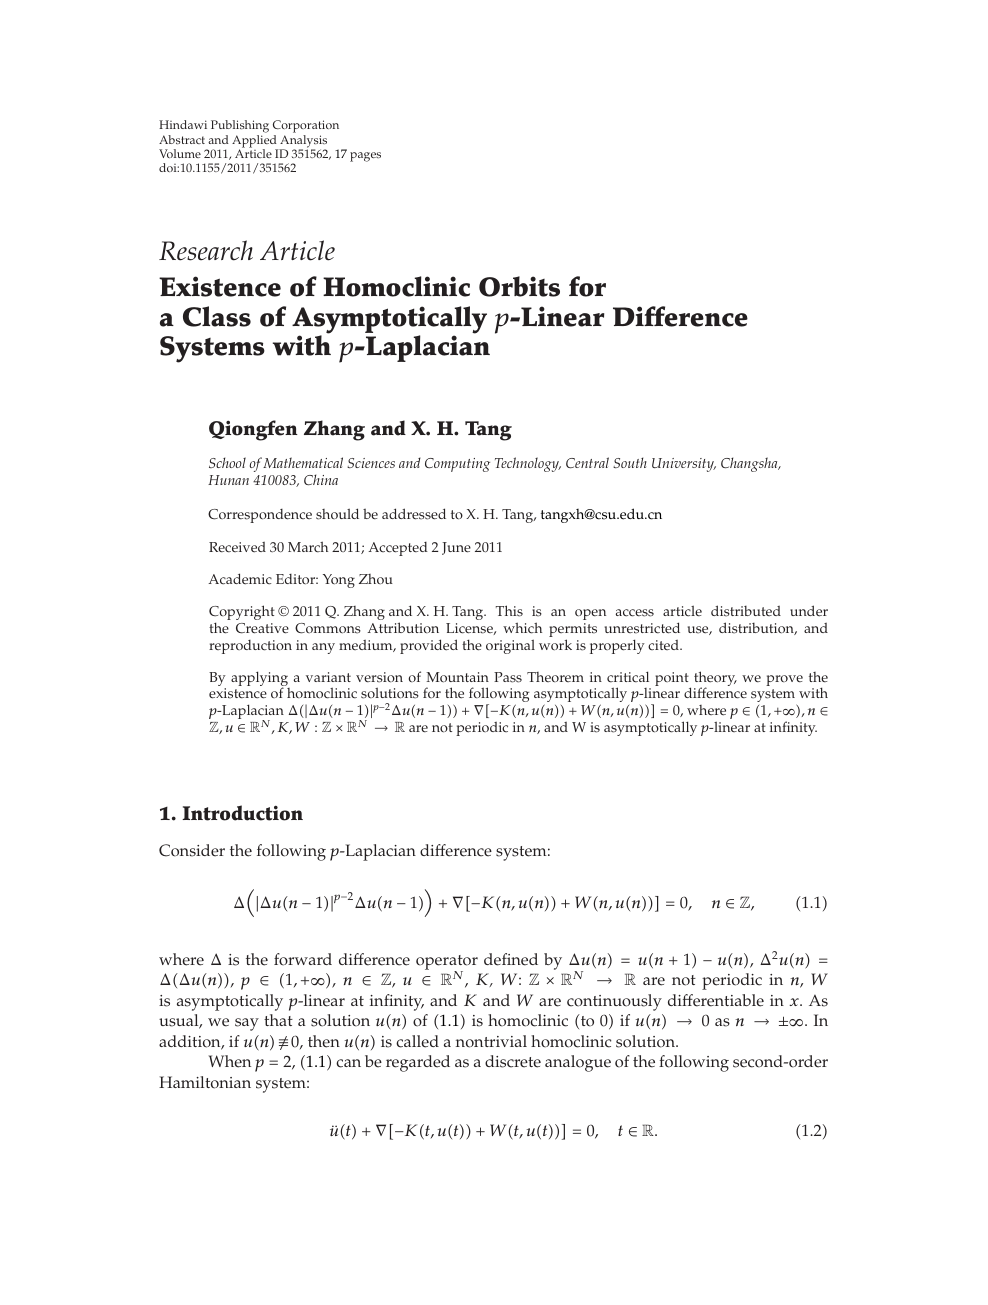 Existence Of Homoclinic Orbits For A Class Of Asymptotically 𝑝 Linear Difference Systems With 𝑝 Laplacian Topic Of Research Paper In Mathematics Download Scholarly Article Pdf And Read For Free On Cyberleninka Open